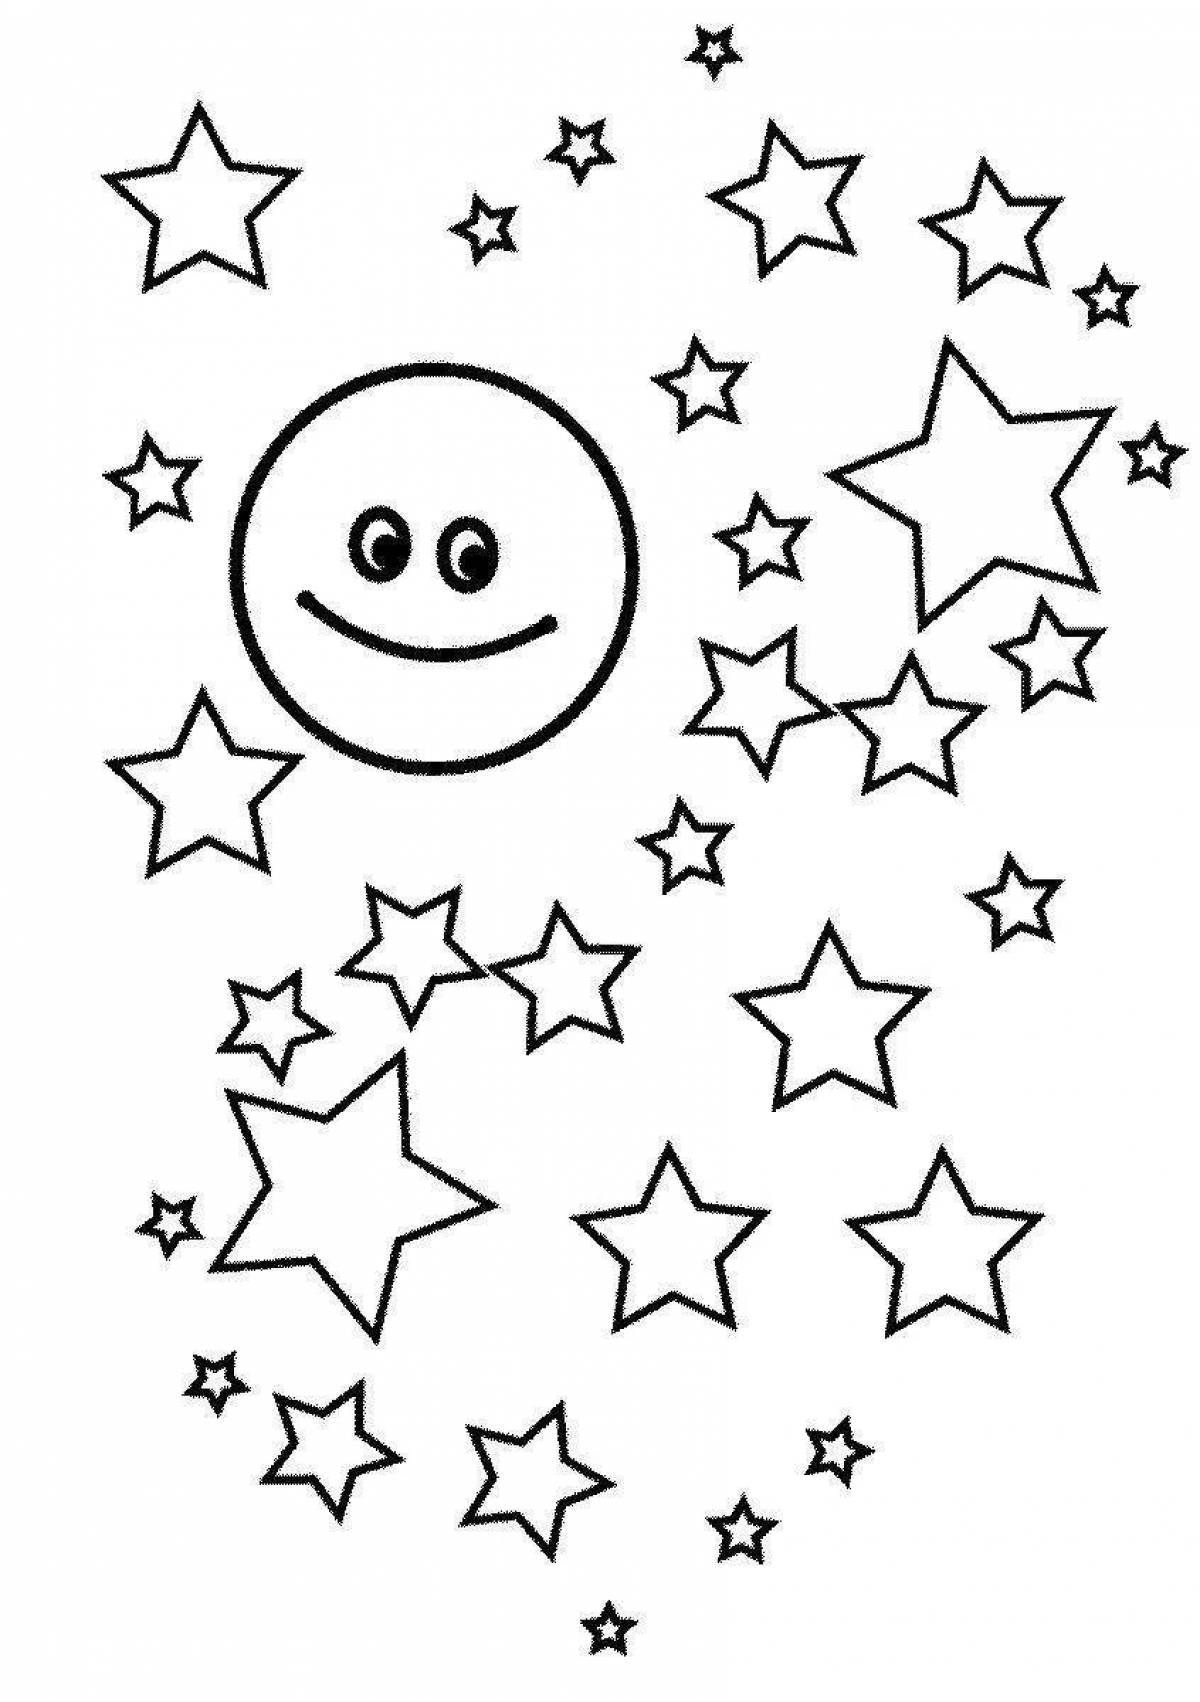 Fascinating starry sky coloring book for kids